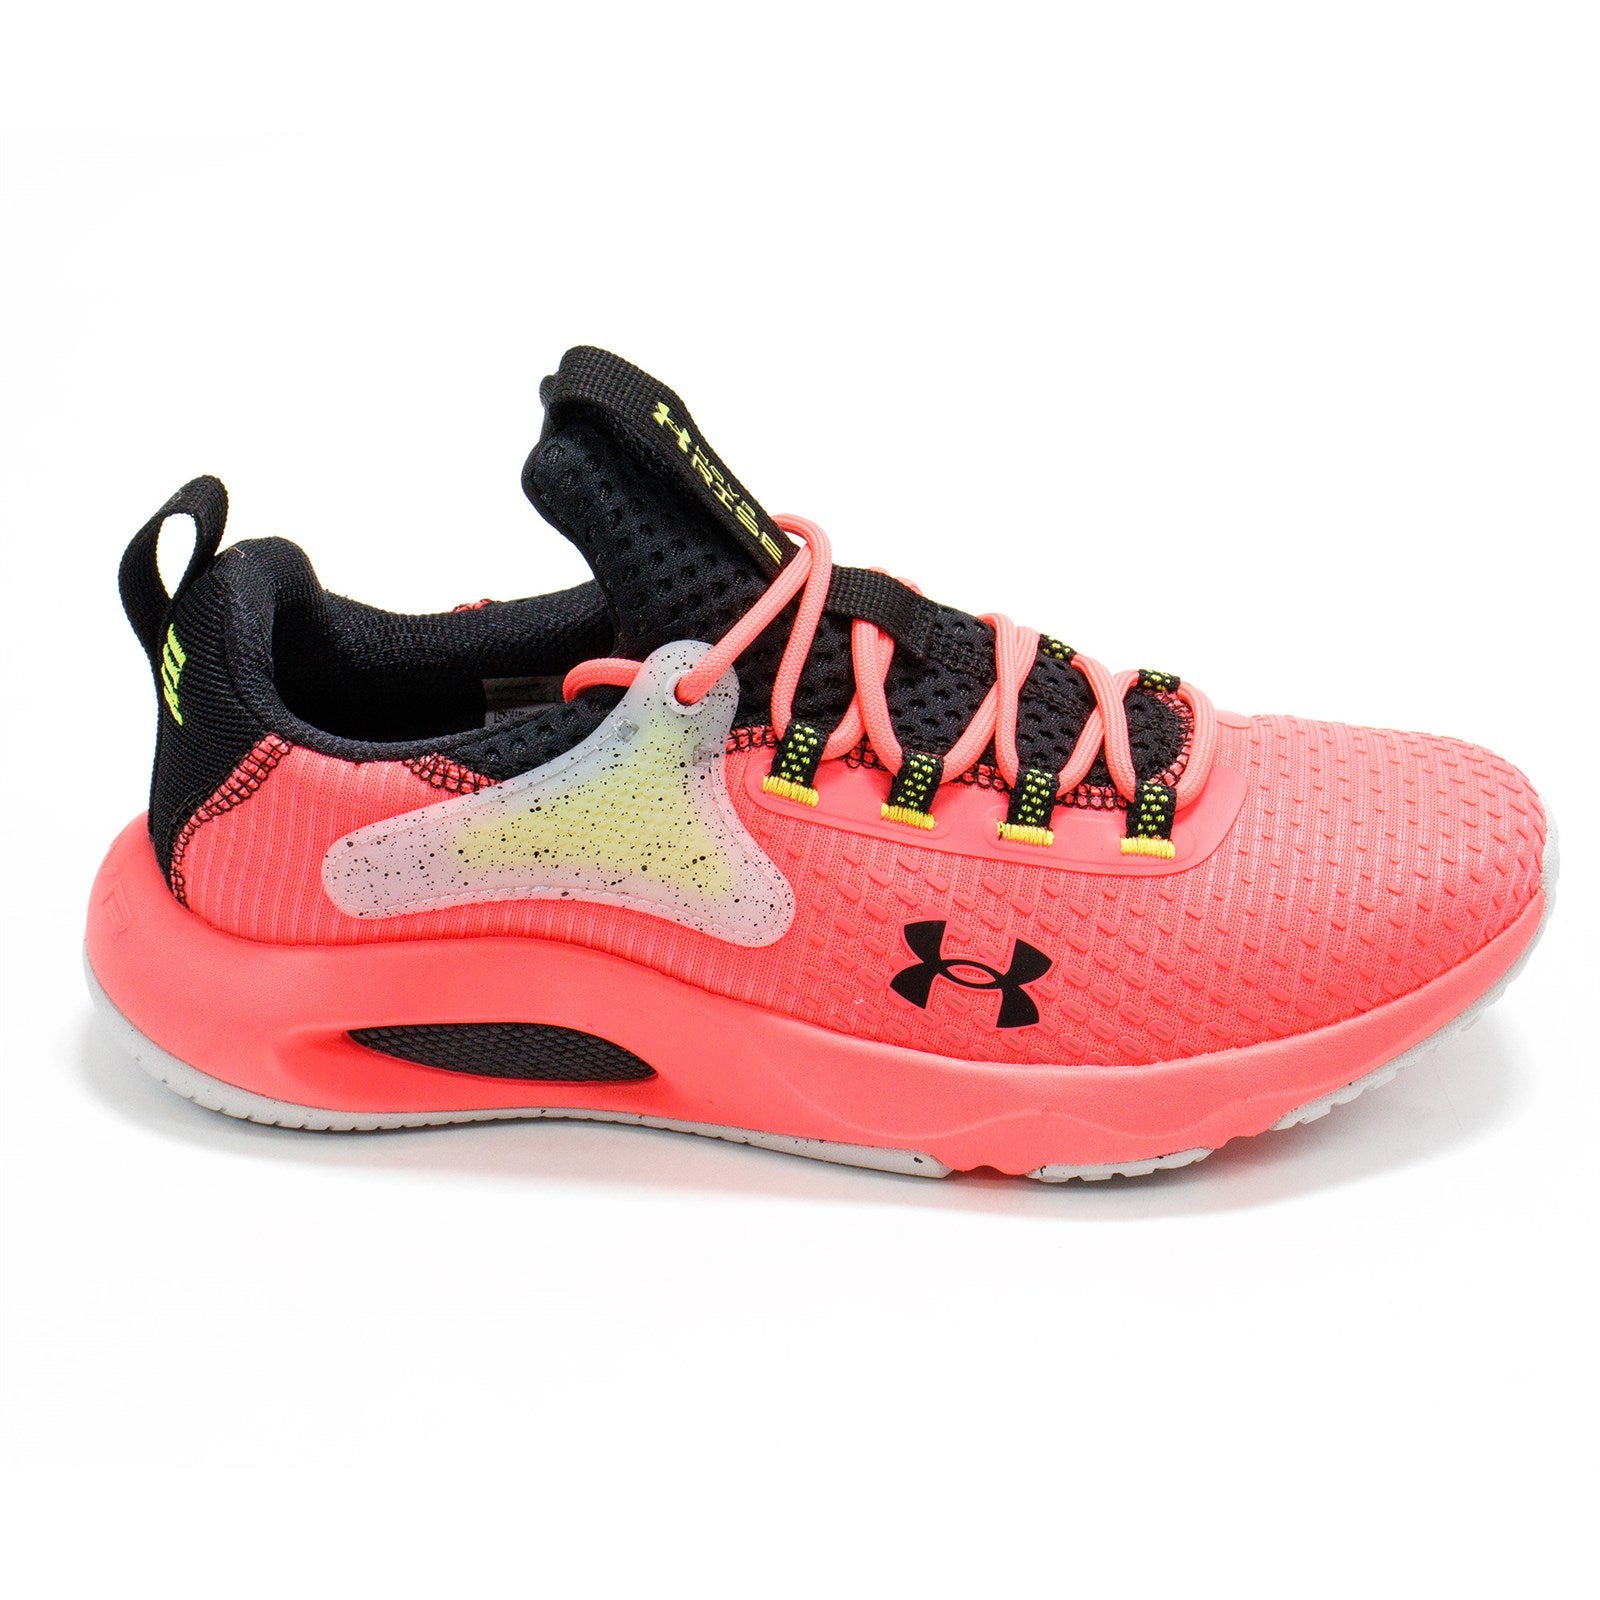 Under Armour Men Hovr Rise 4 Training Shoes